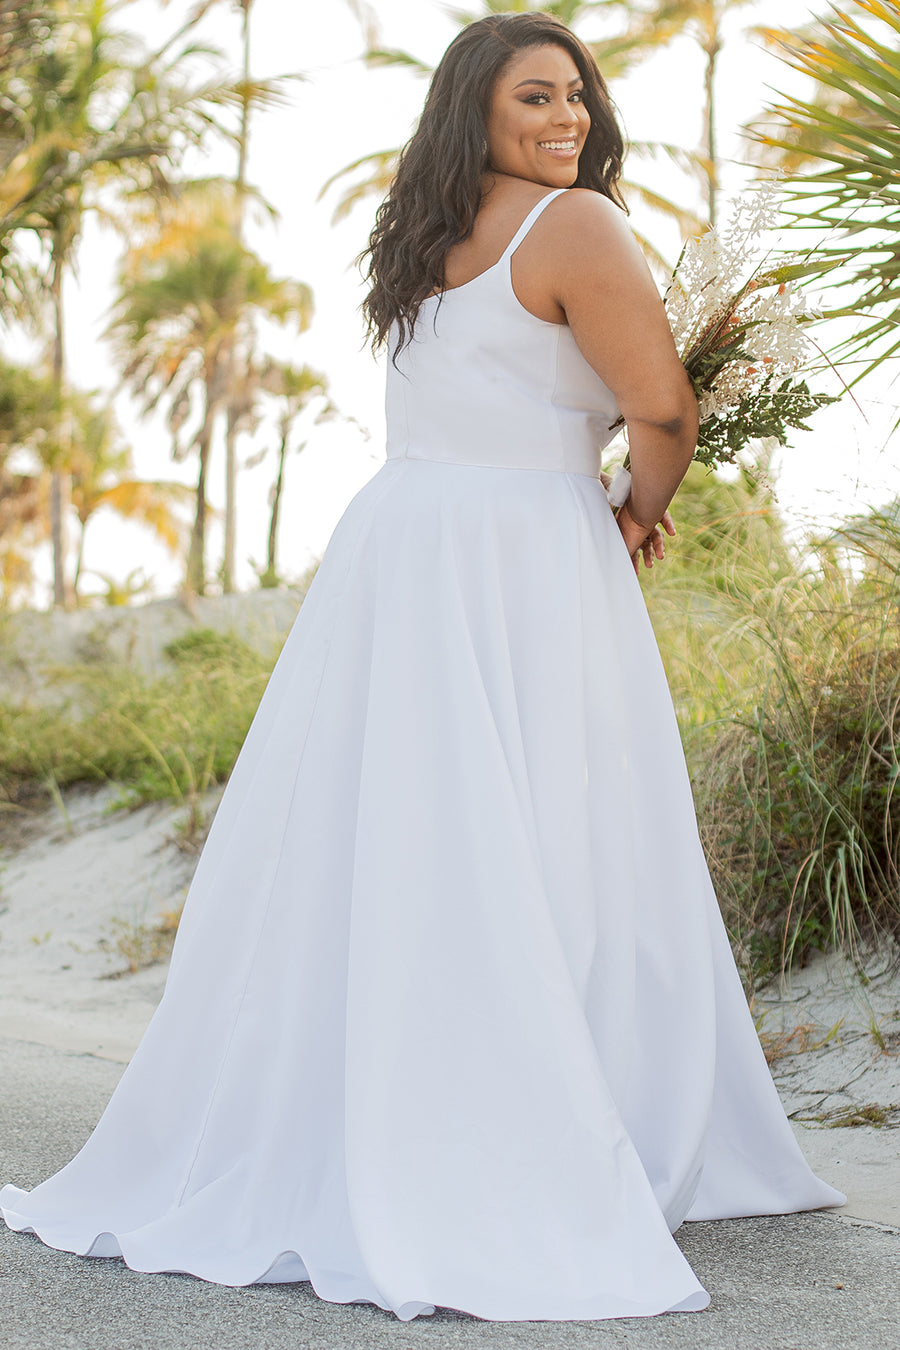 SC5281 Sydney's Bridal by Sydney's Closet Aline silhouette with scoop neckline and 1 inch straps dress features piped waistband and center back zipper available in ivory